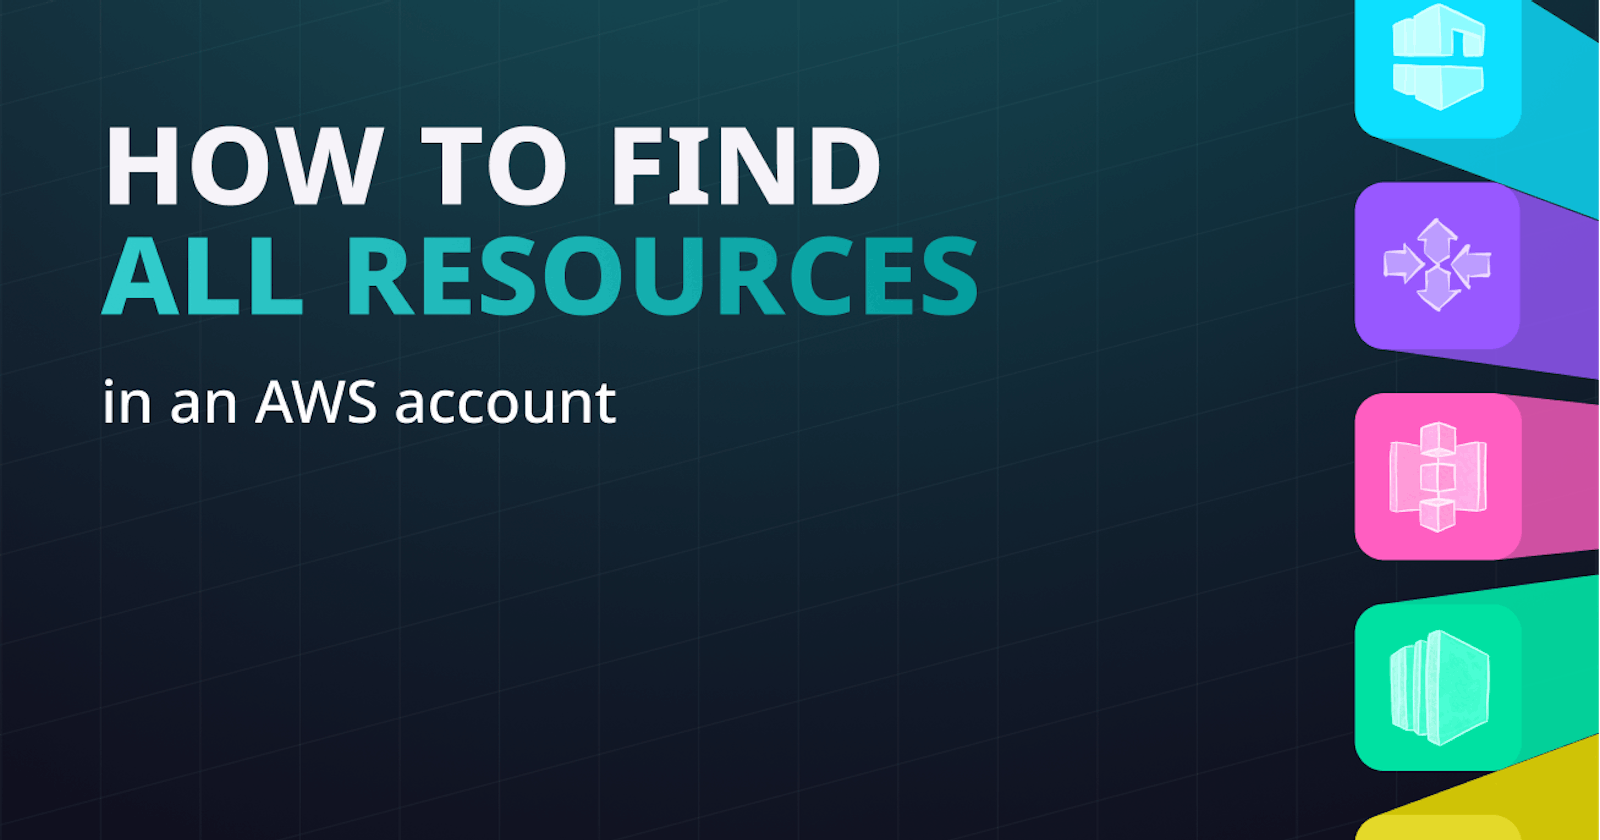 How to find all resources in an AWS account